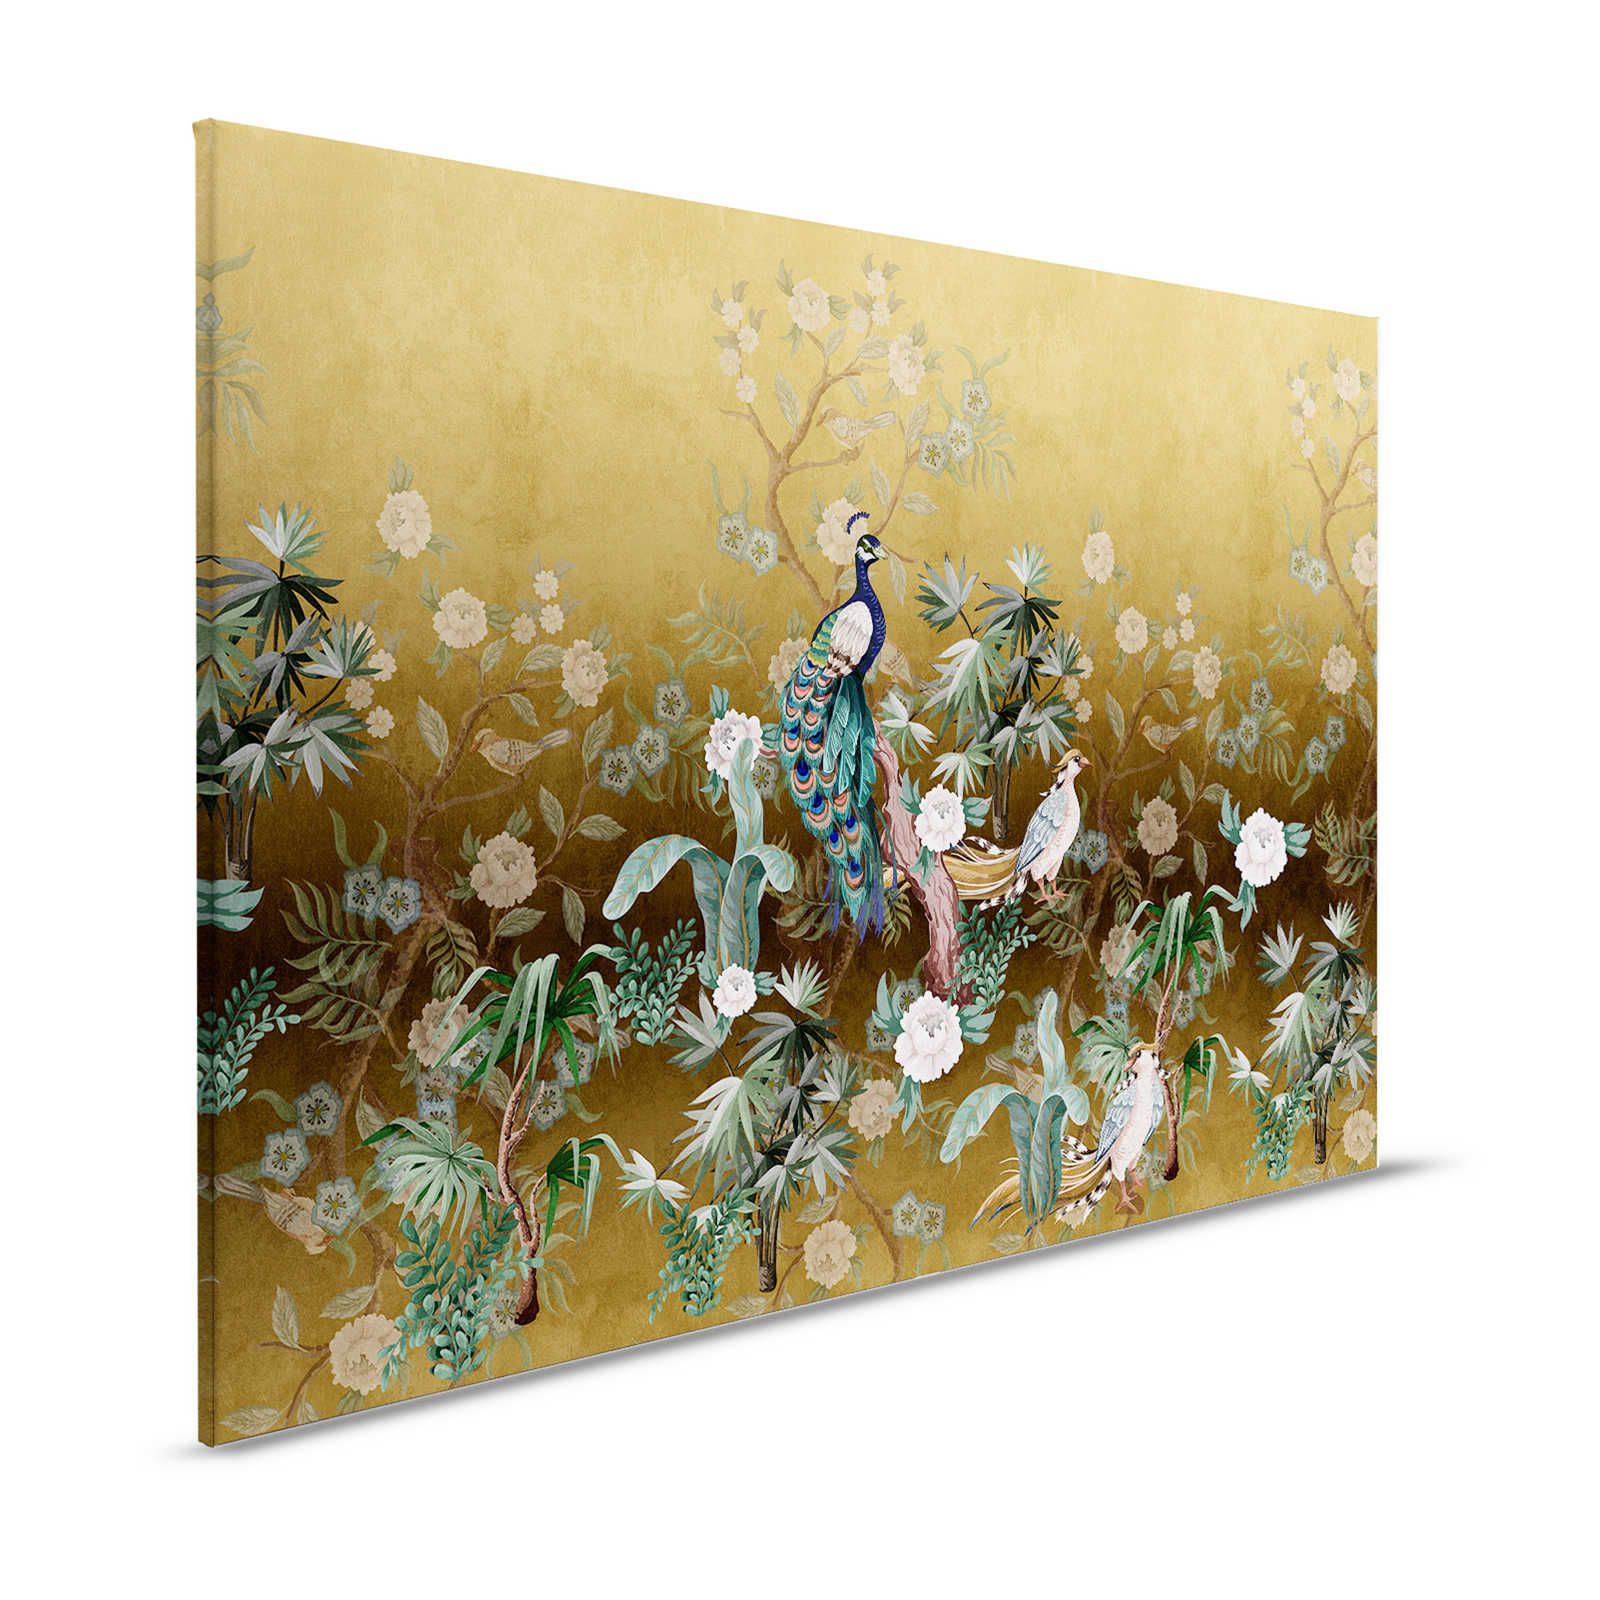 Peacock Island 3 - Canvas painting Peacocks Garden Gold with Plants & Blossoms - 1.20 m x 0.80 m
